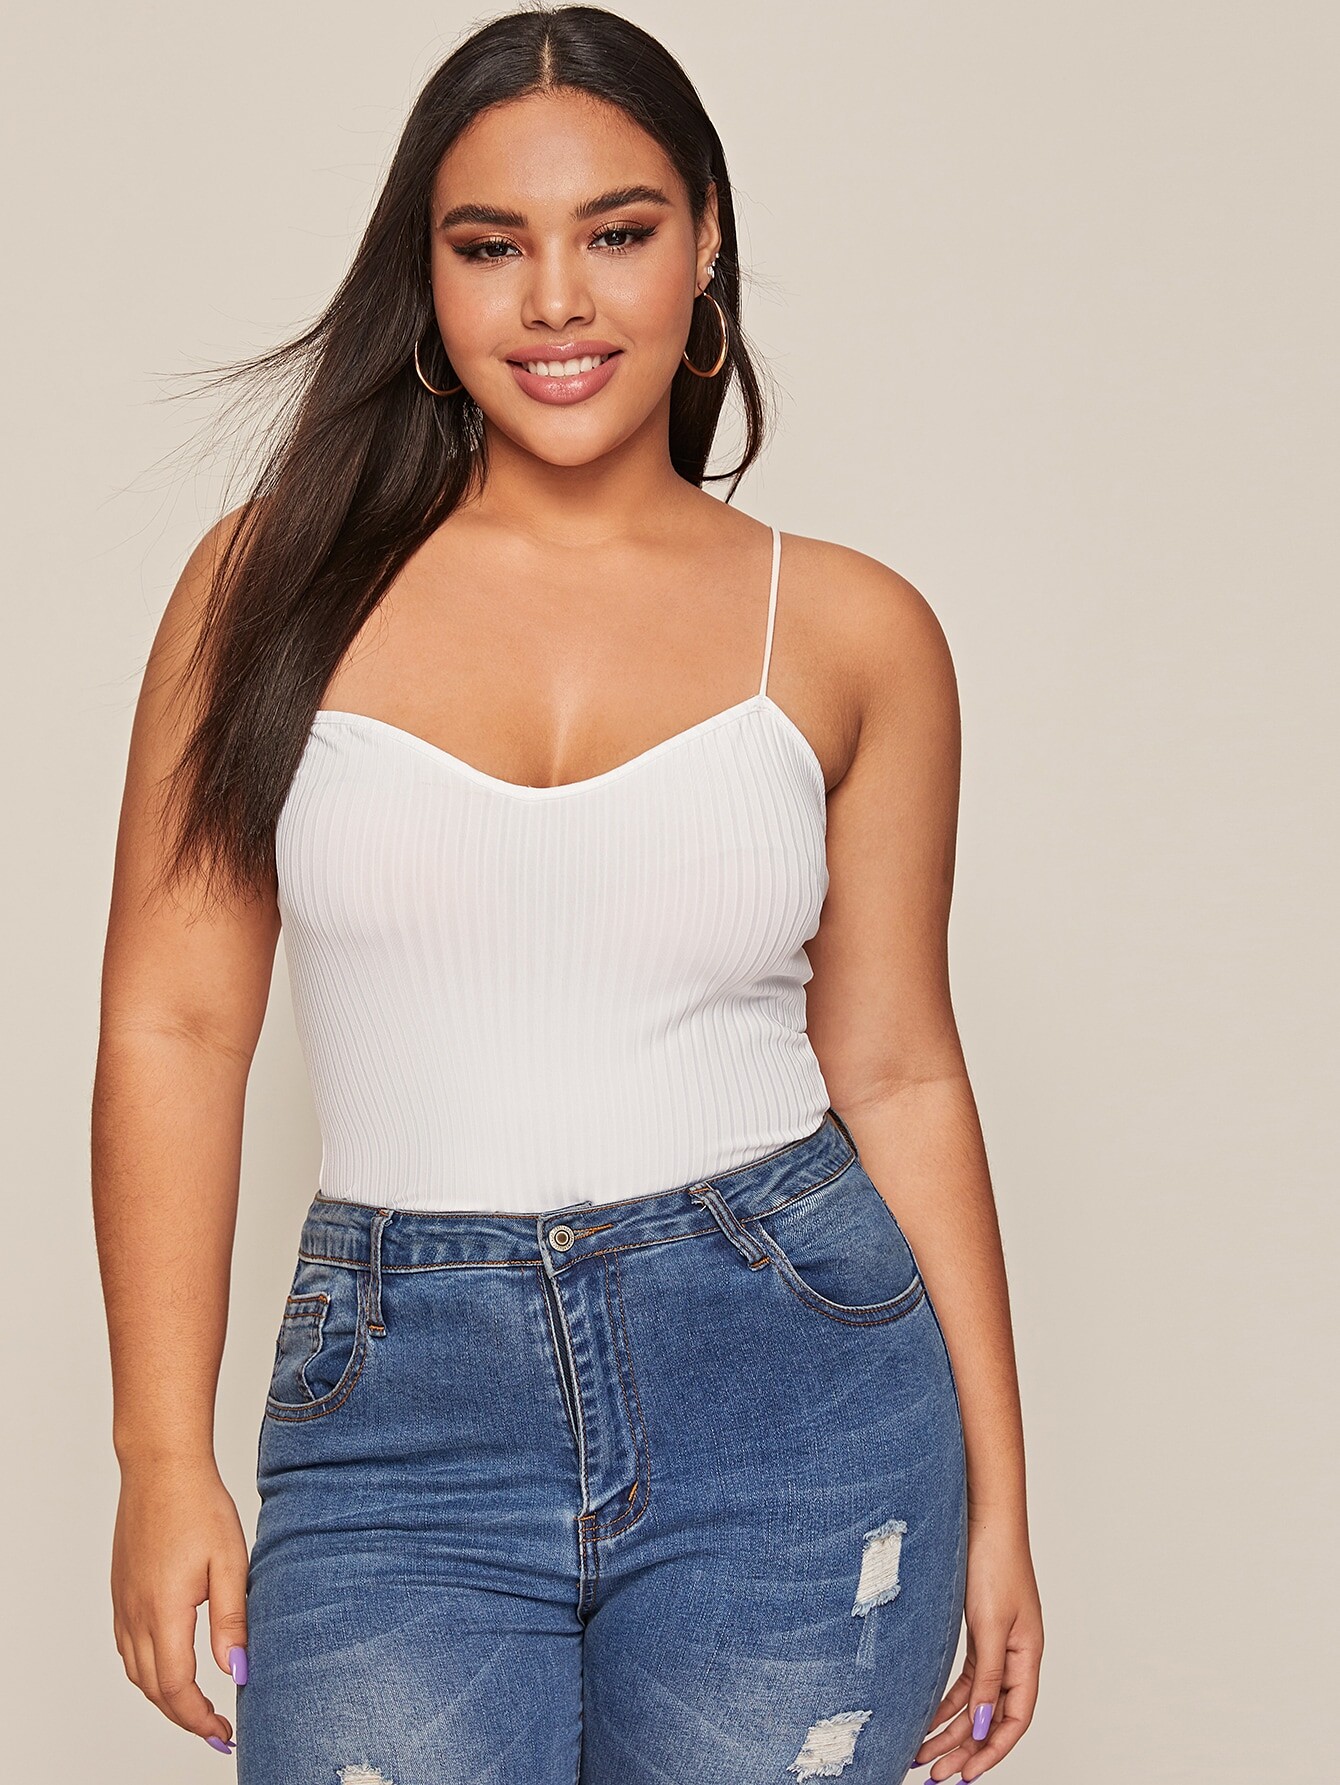 Name of this plus size SHEIN model? 